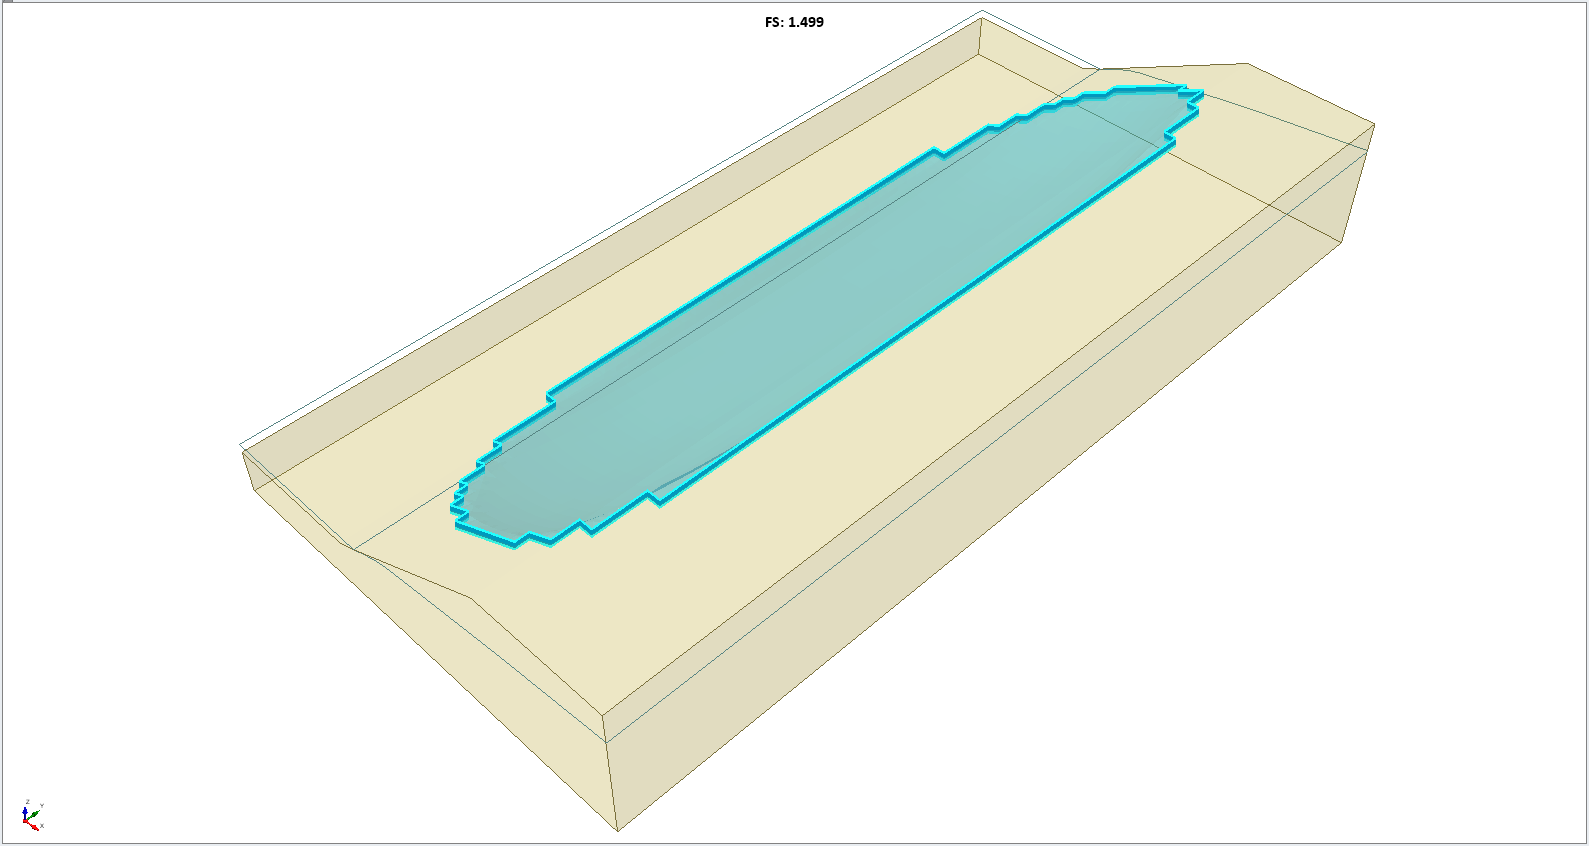 Extruded Model with Steady State Groundwater